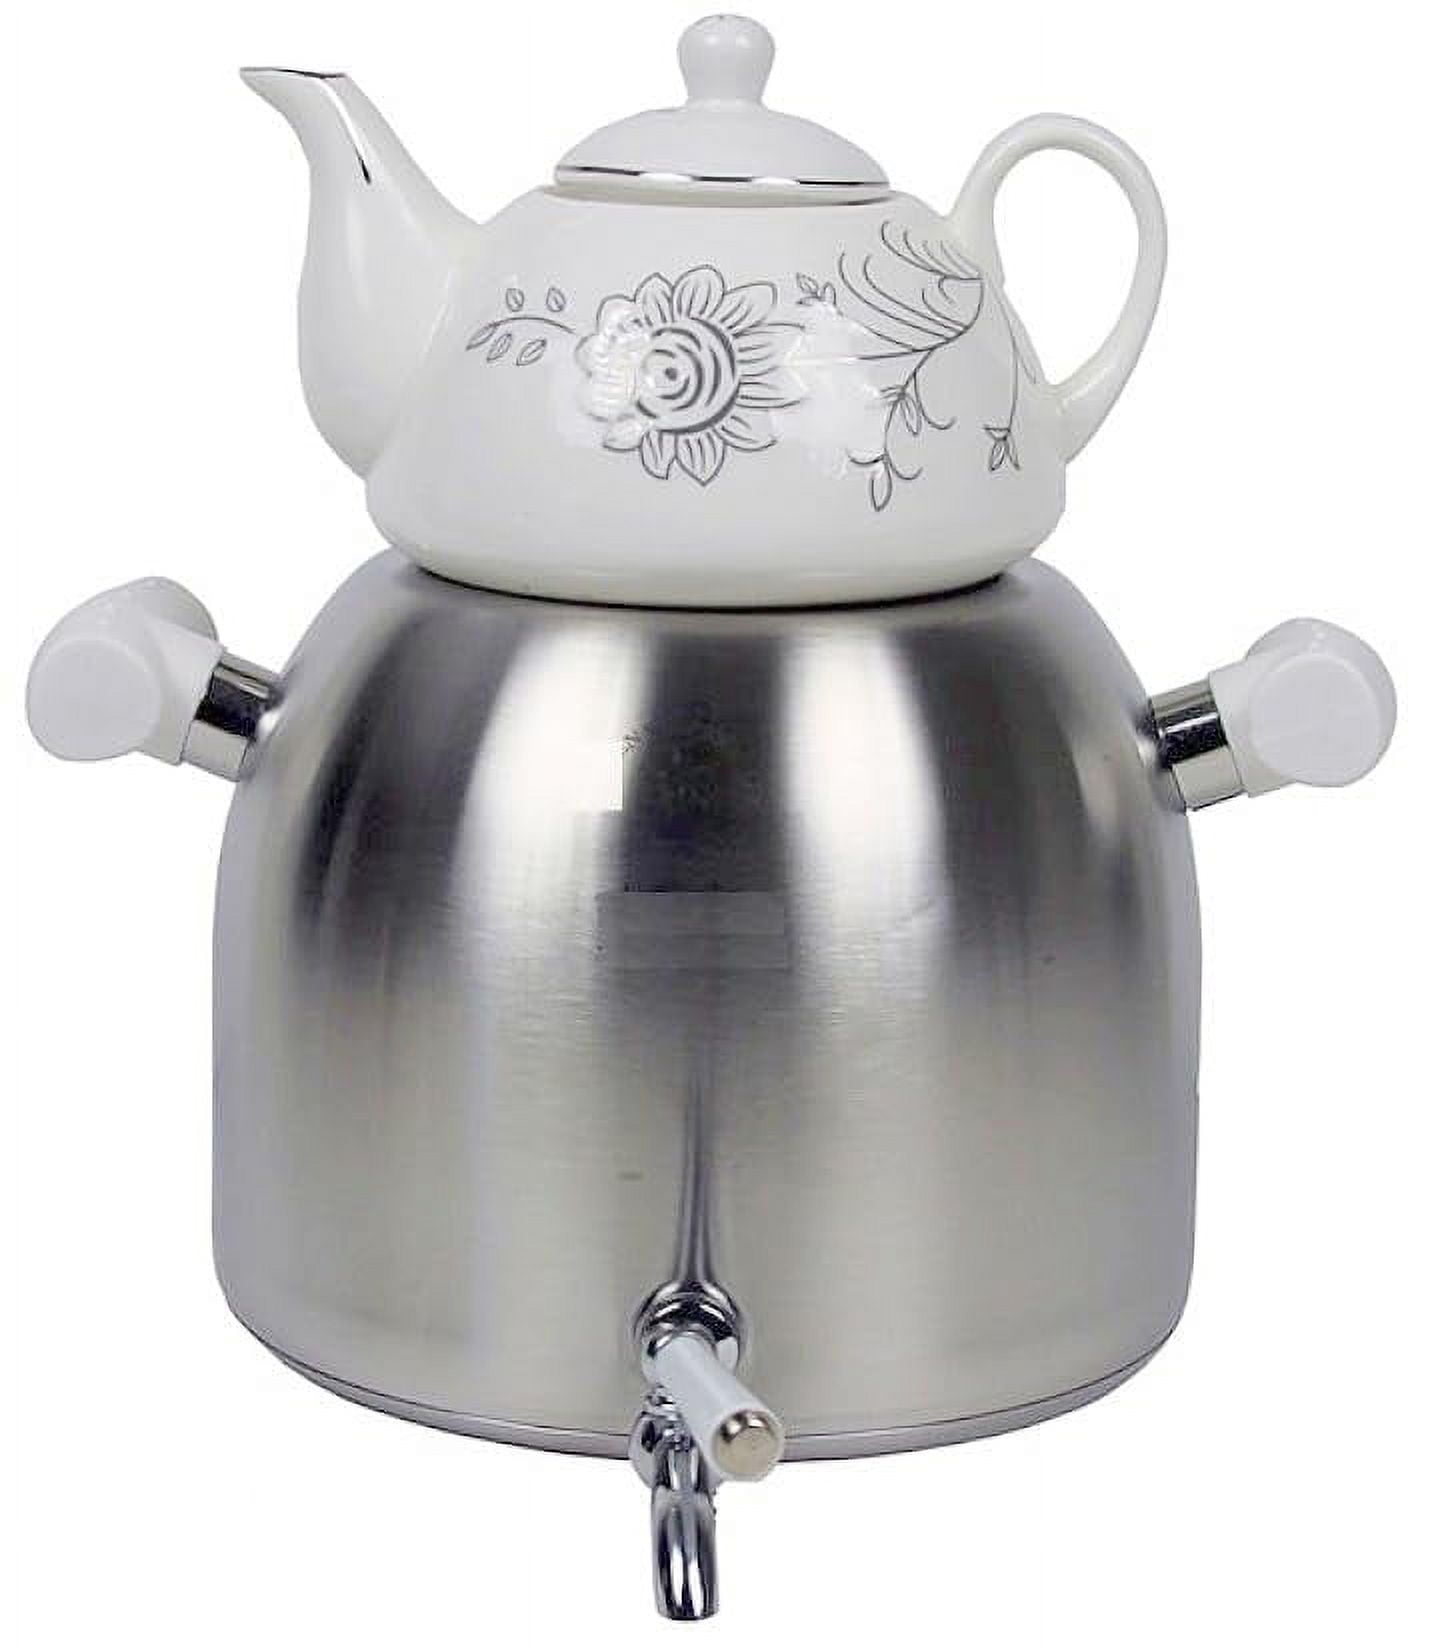  Electric Stainless Steel/Silver Persian Russian Turkish Arabic  3 Liter Samovar With Kettle 32oz Tea Maker Water Teapot 110V 1300W Auto  Shut Off, Keep Warm: Home & Kitchen